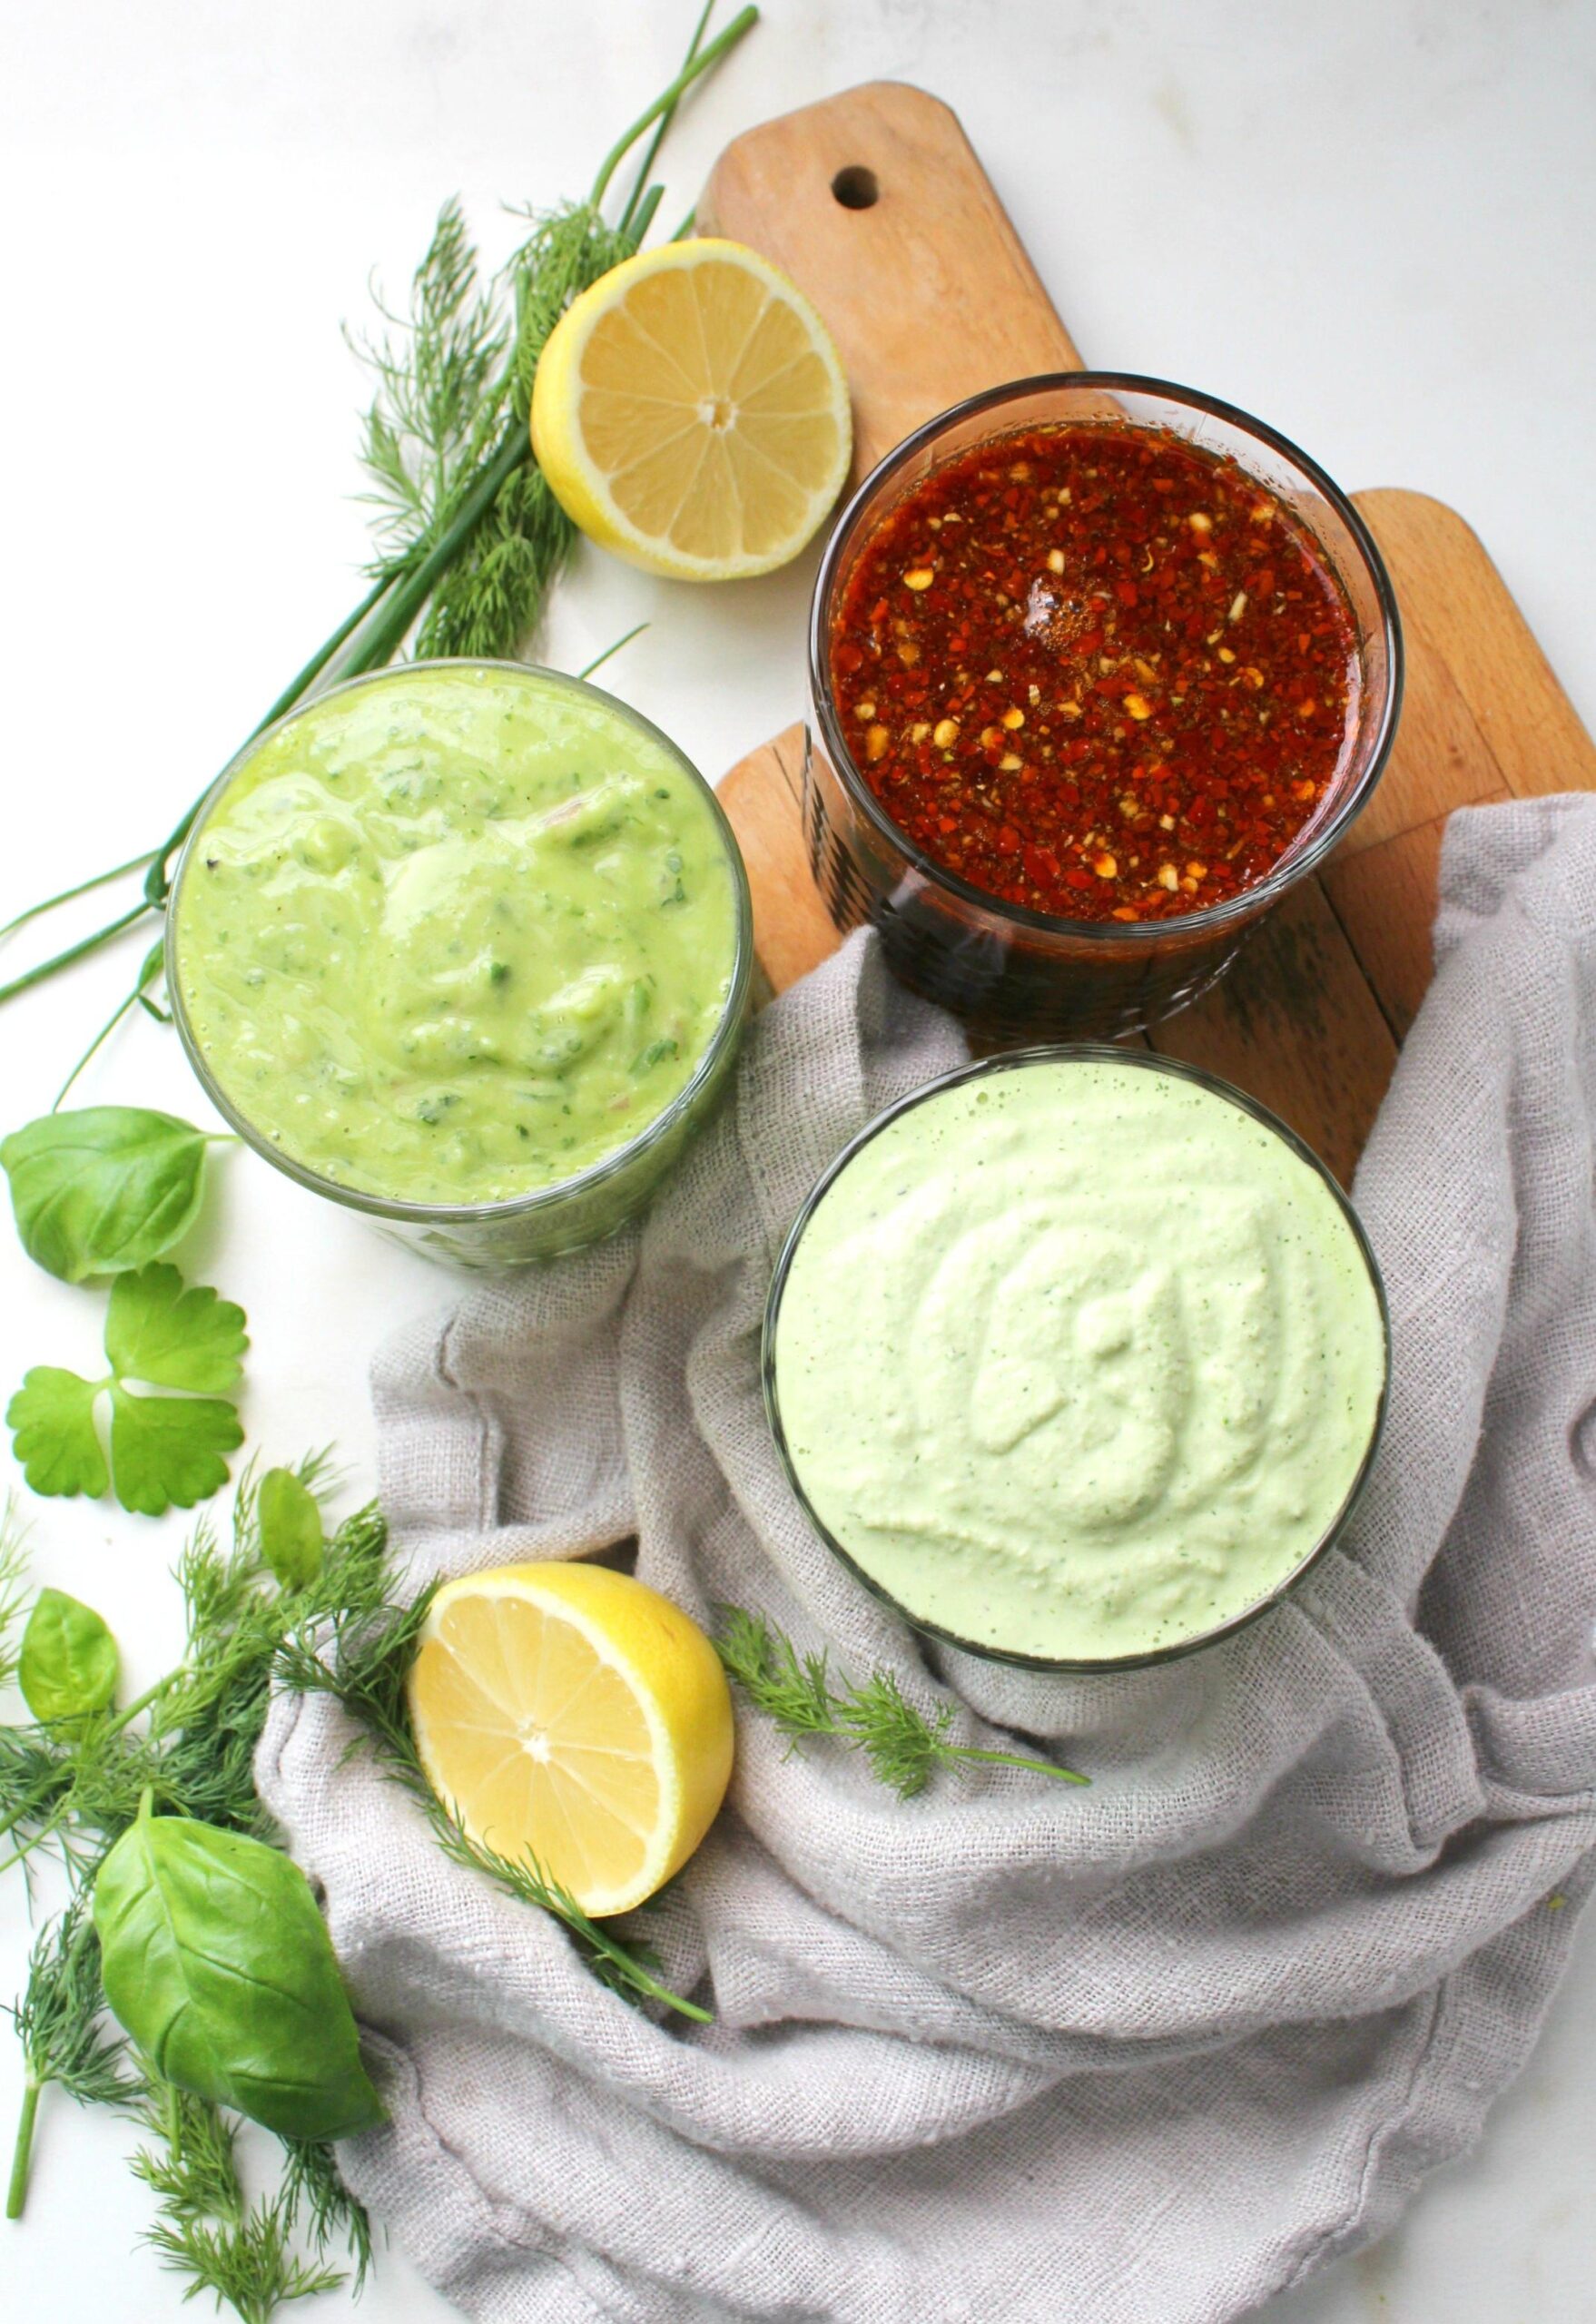  Your go-to salad dressing that doesn't compromise flavor for health.